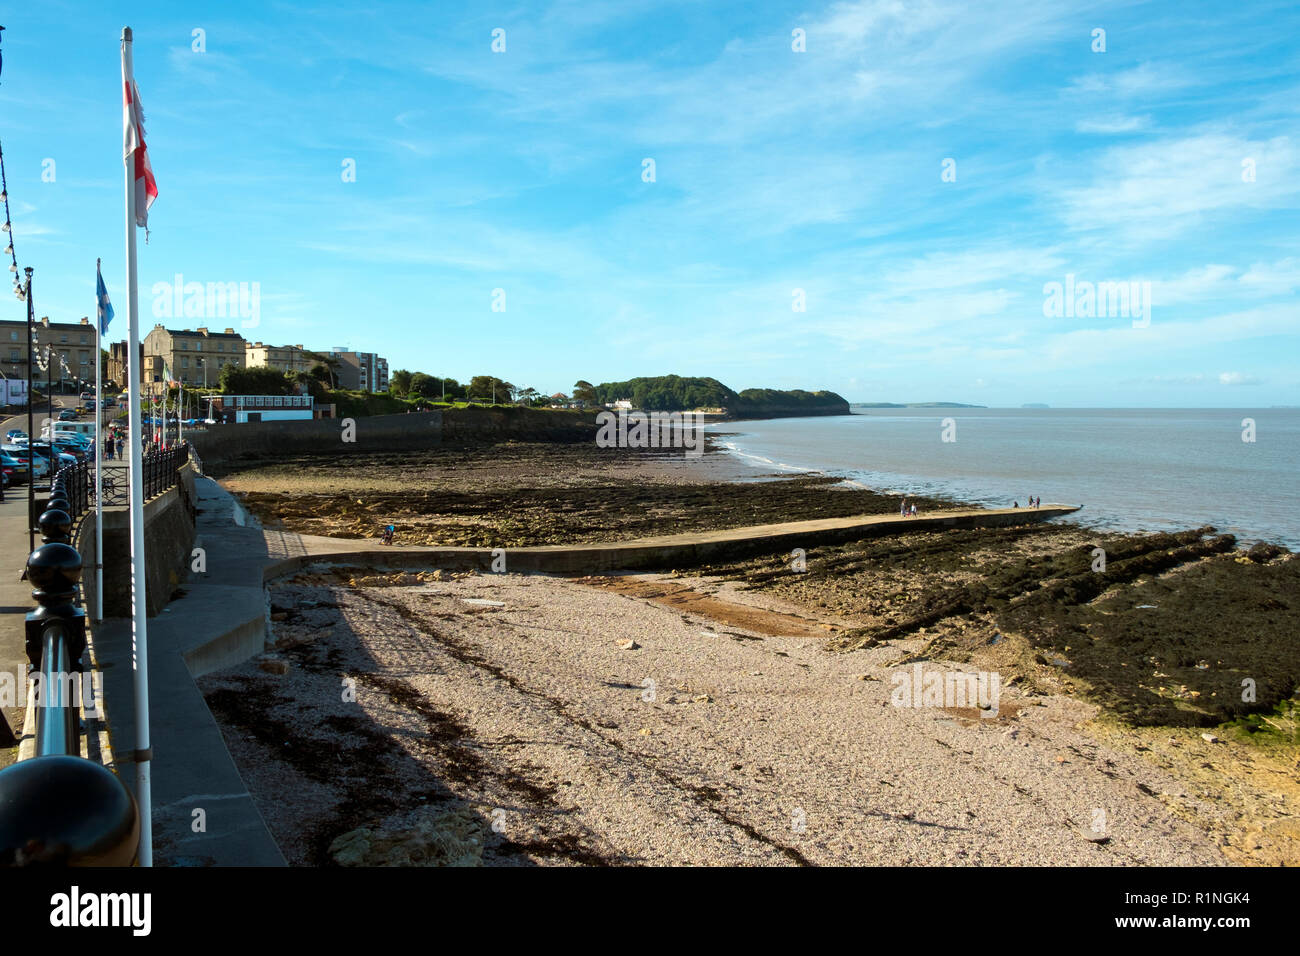 Clevedon, Somerset, UK - 11th September 2016: Late summer sunshine brings visitors to the rocky shore and seafront at Clevedon on the Bristol Channel, Somerset, UK. Clevedon in the Victorian era was a popular seaside resort. Stock Photo